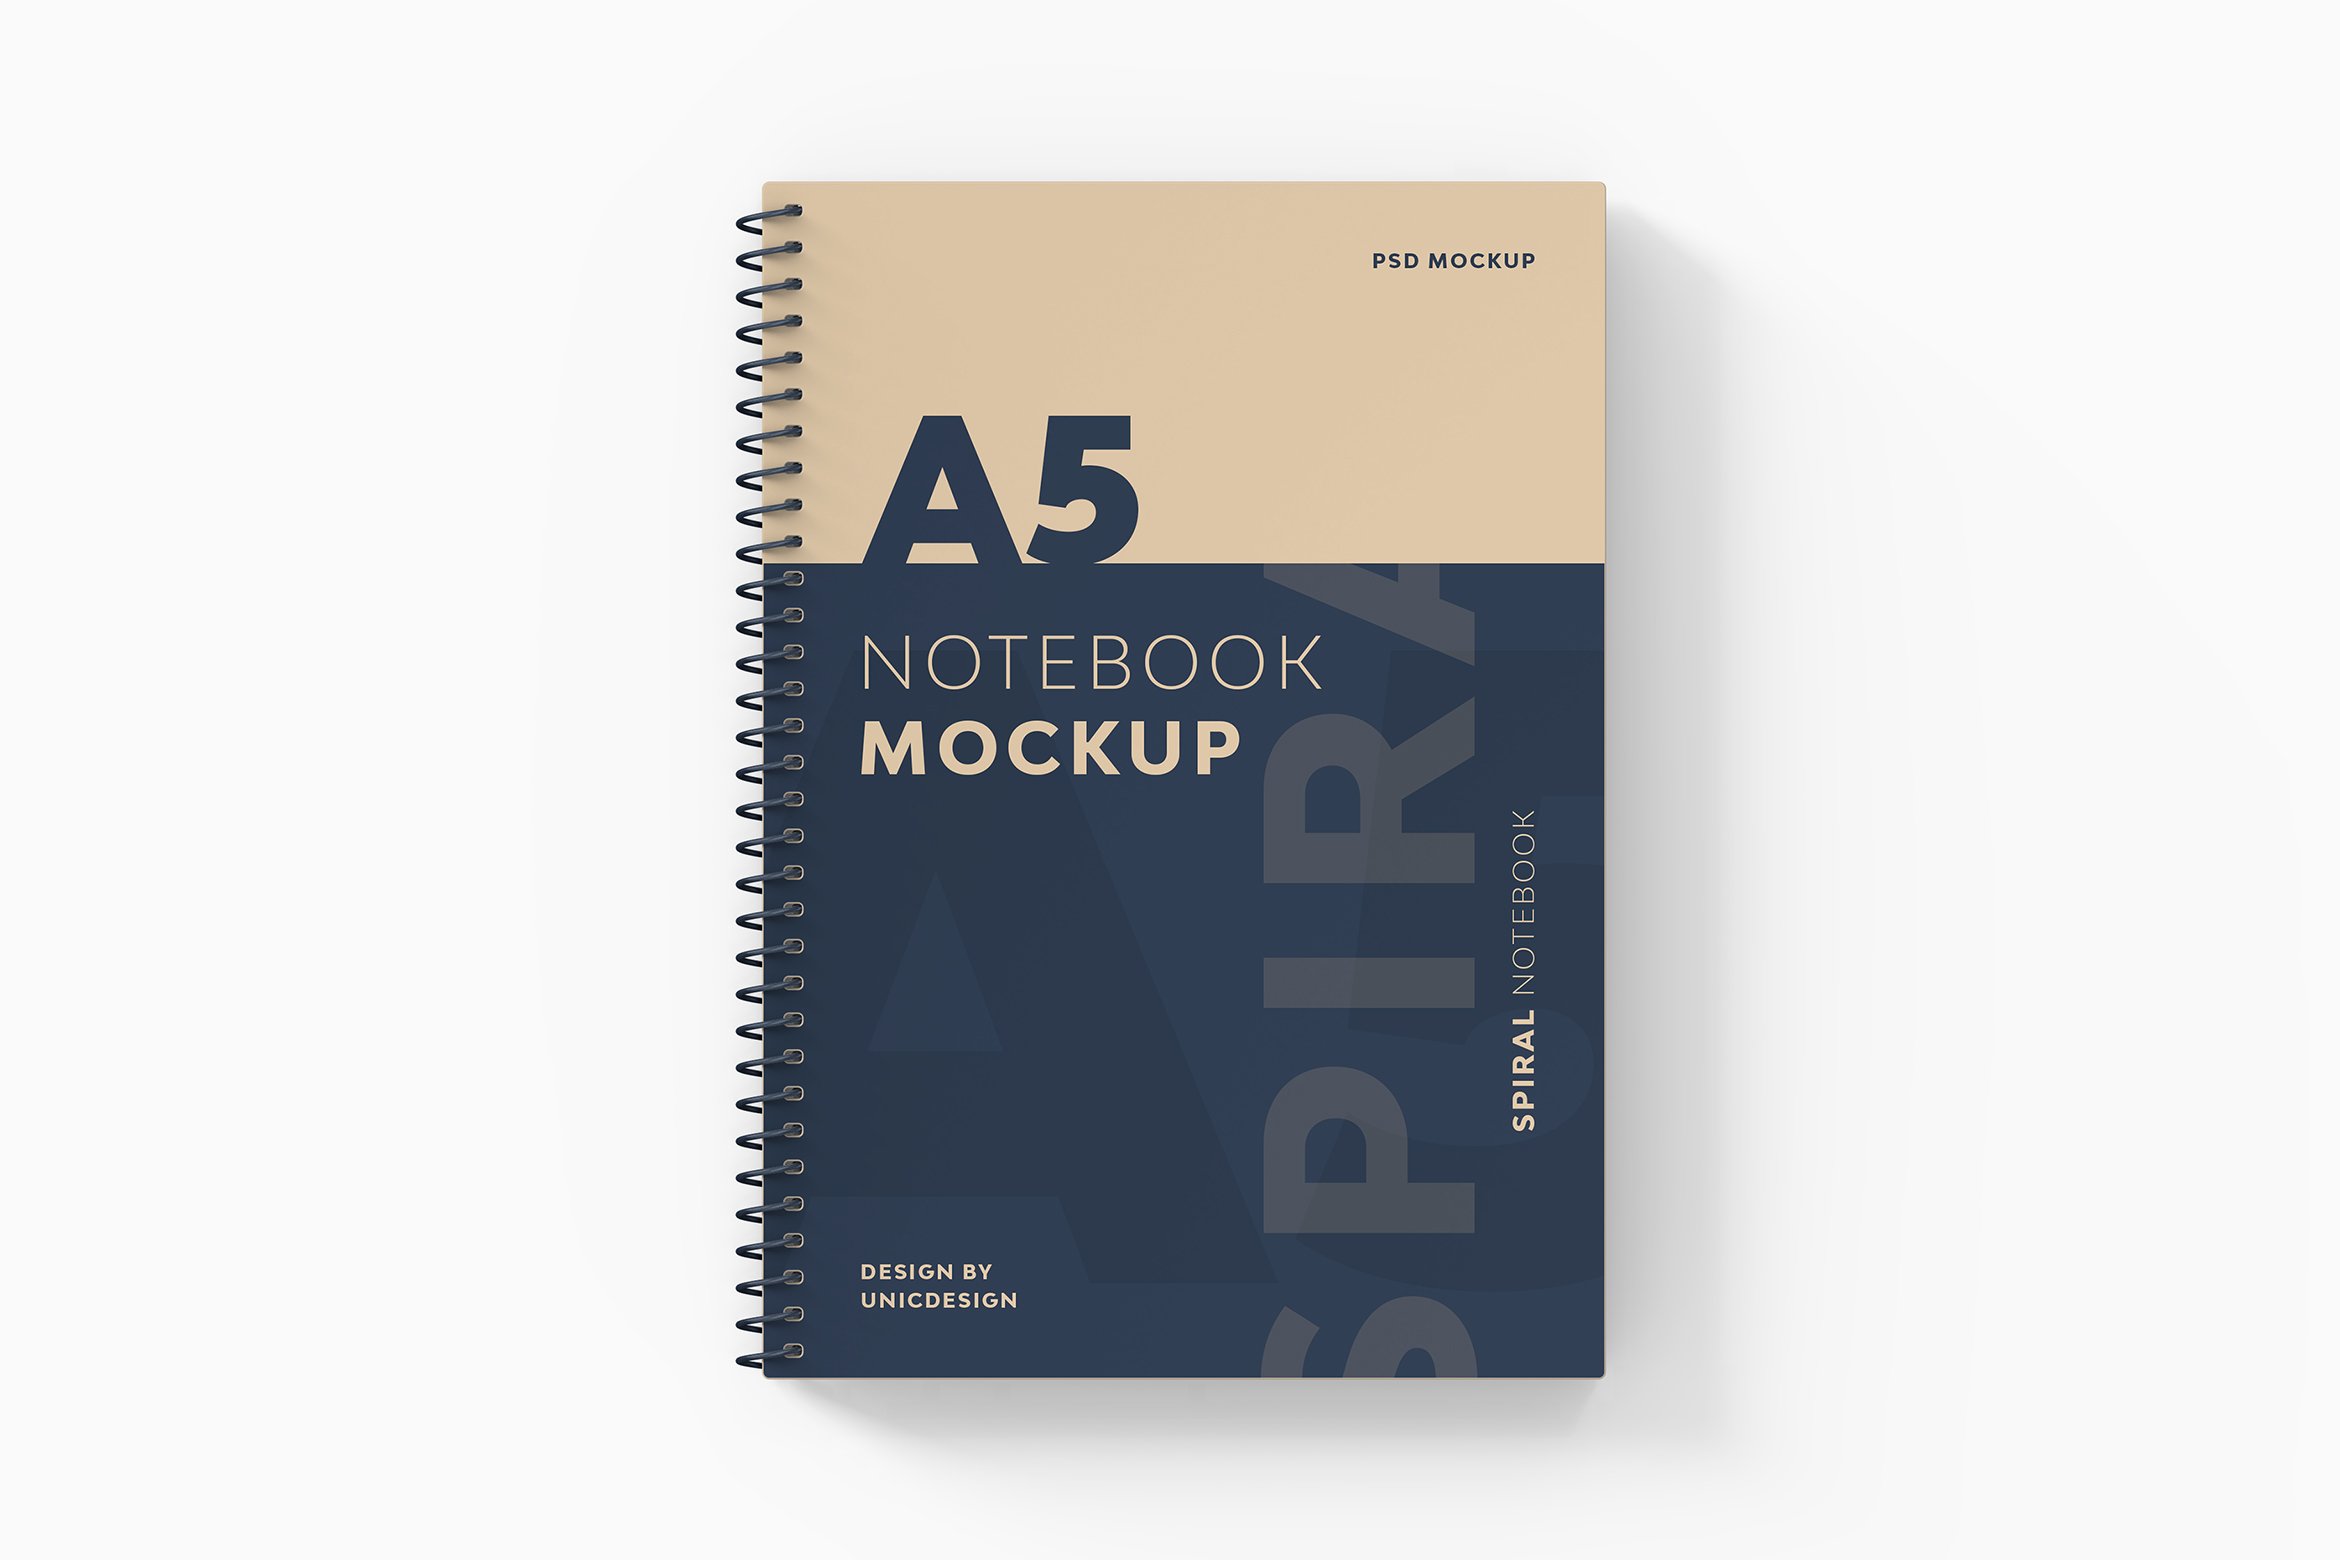 A5 Spiral Notebook Mockup cover image.